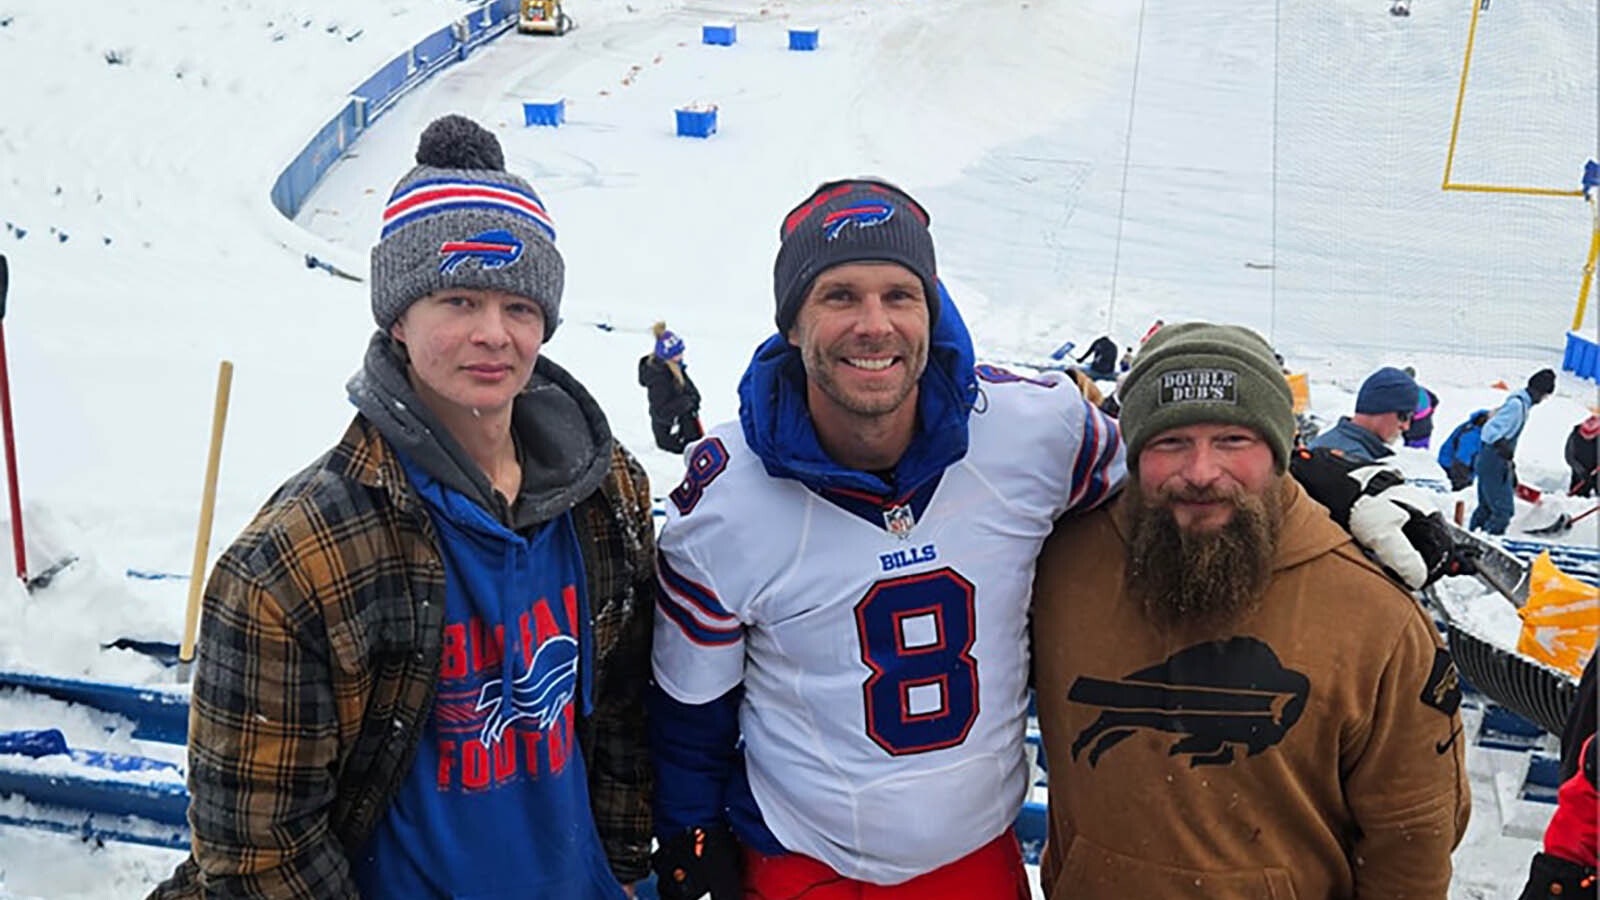 While helping shovel out Highmark Stadium in Buffalo on Friday in preparation for Sunday's playoff game between the Buffalo Bills and Kansas City Chiefs, the Double Dubs crew was surprised to meet former NFL punter Brian Moorman. Here he poses with Ransom Kessler, left, and Trent Weitzel.